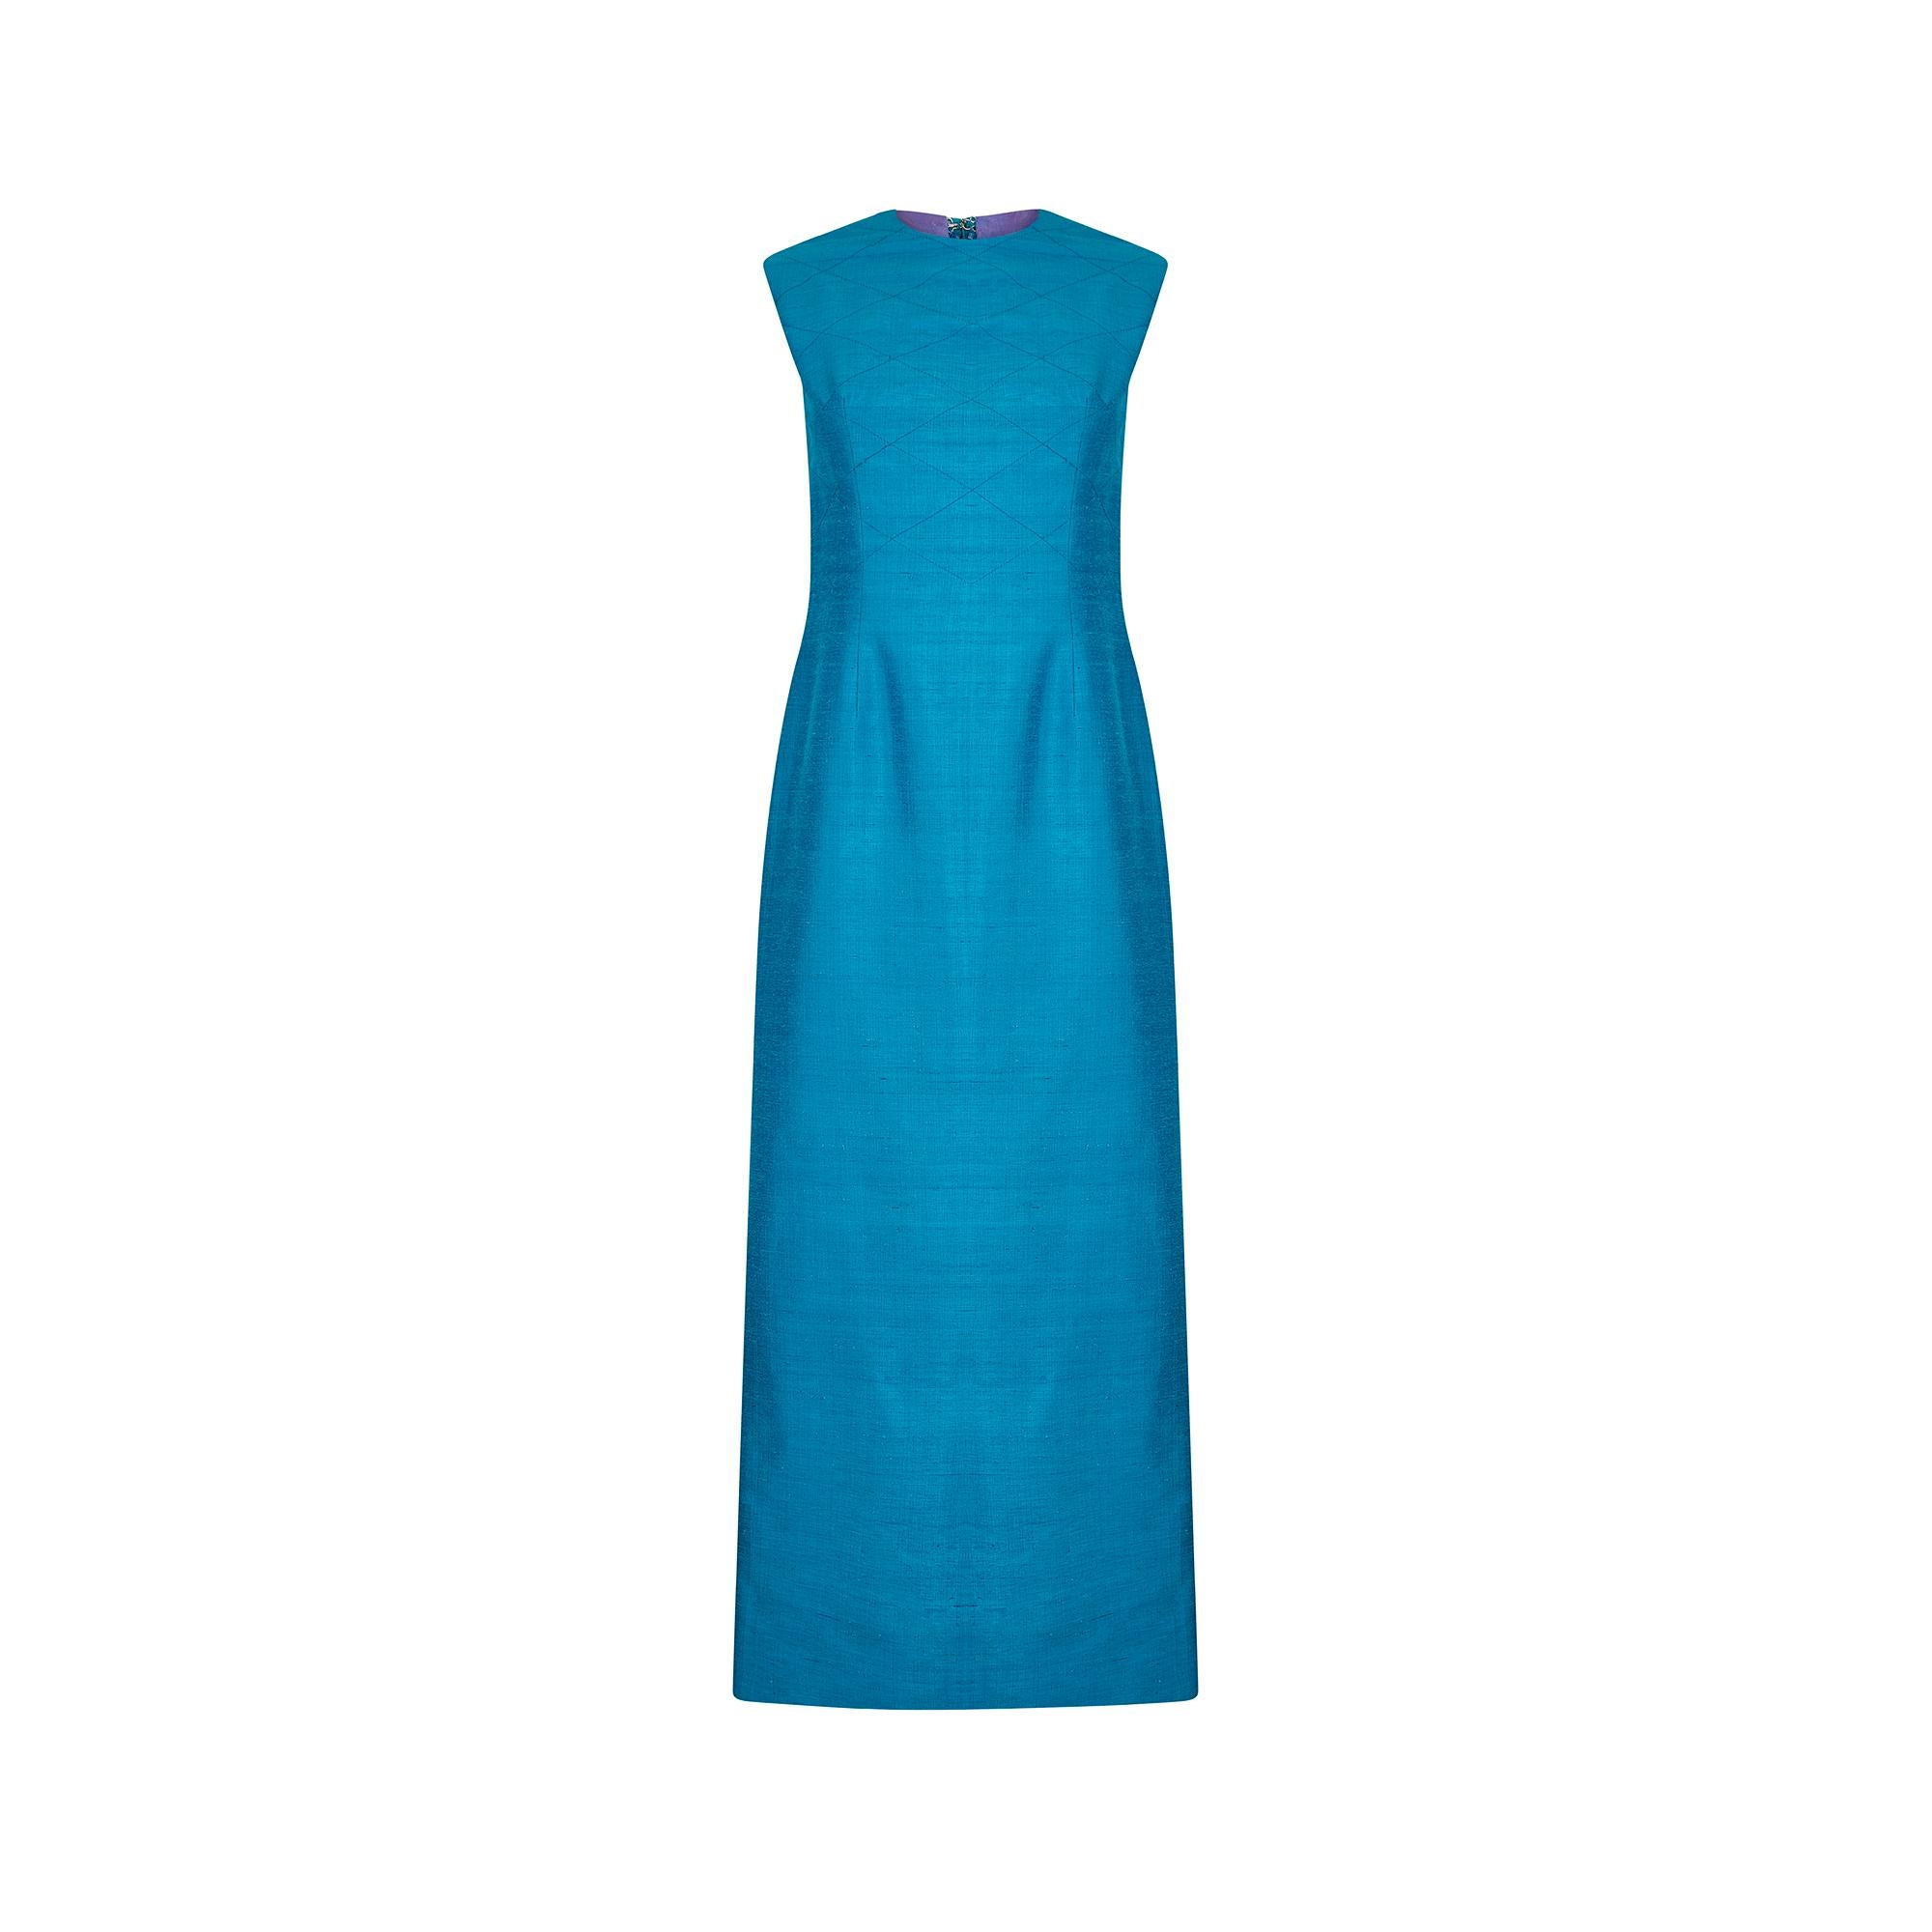 This 1960s Tony Armstrong evening dress is cut in a classic and flattering column silhouette with a high rounded neckline and short, slightly capped sleeves. The front is very lightly embroidered with fine blue thread in a criss-cross pattern.  This